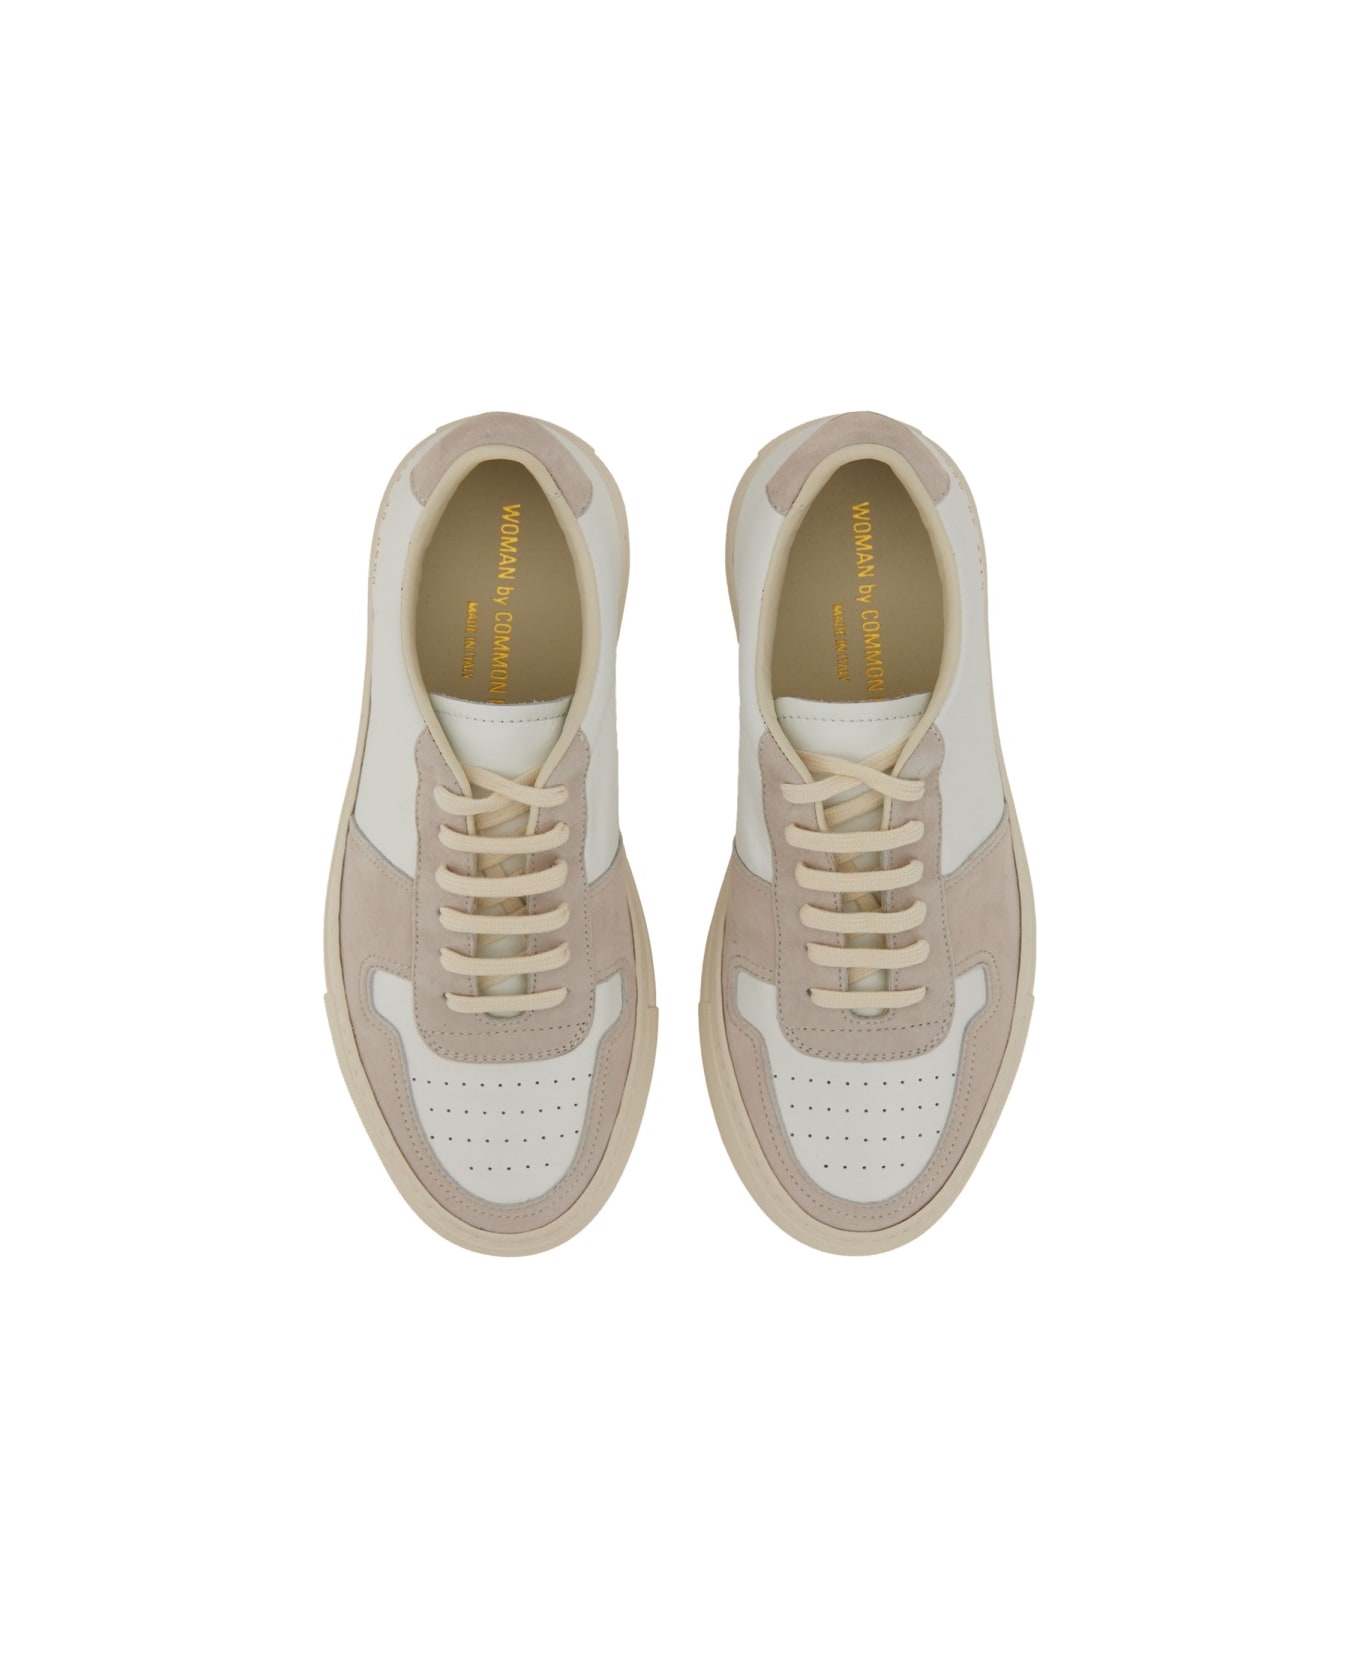 Common Projects 'bball' Sneaker - NUDE